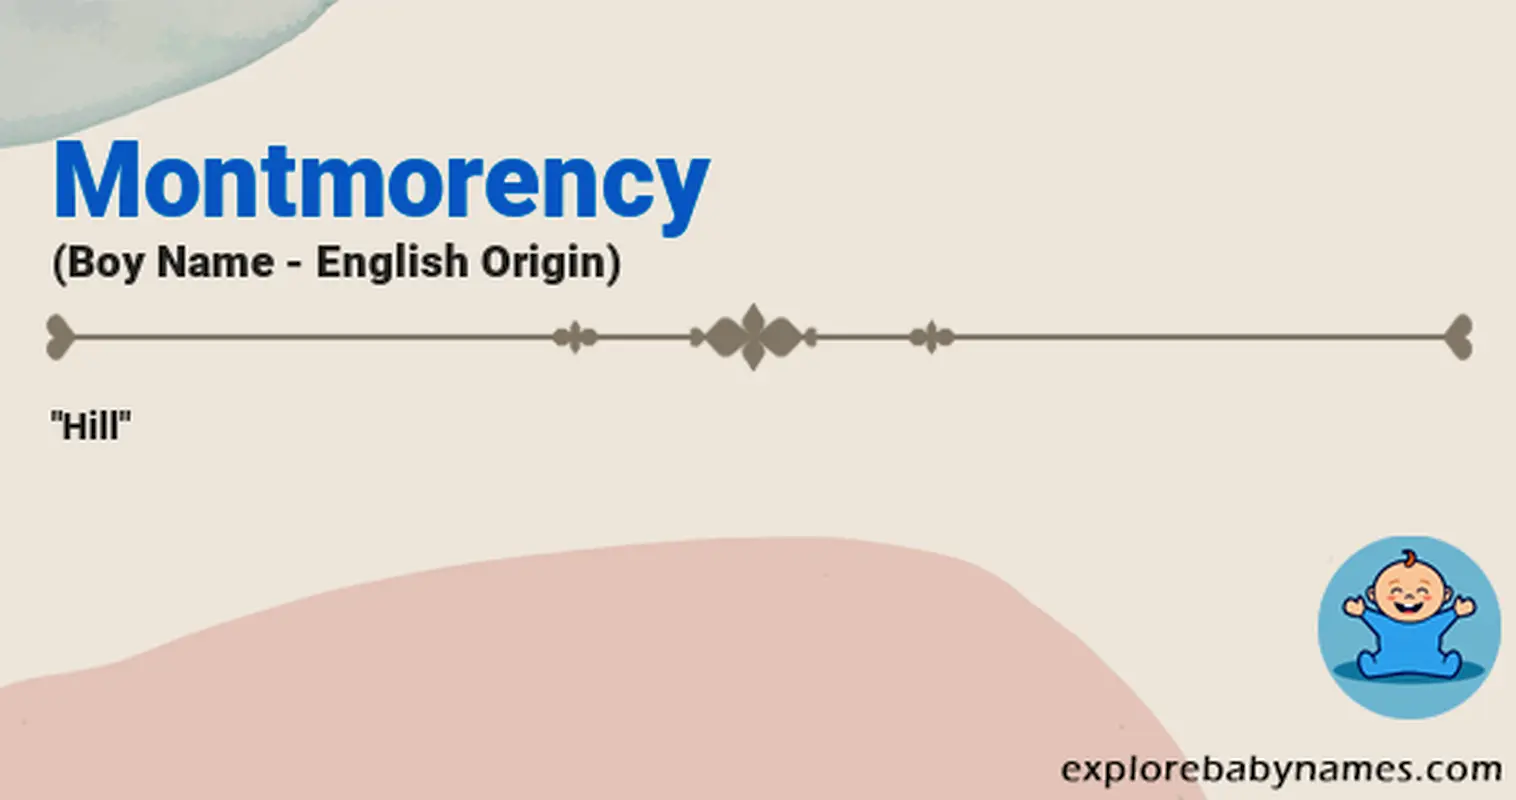 Meaning of Montmorency